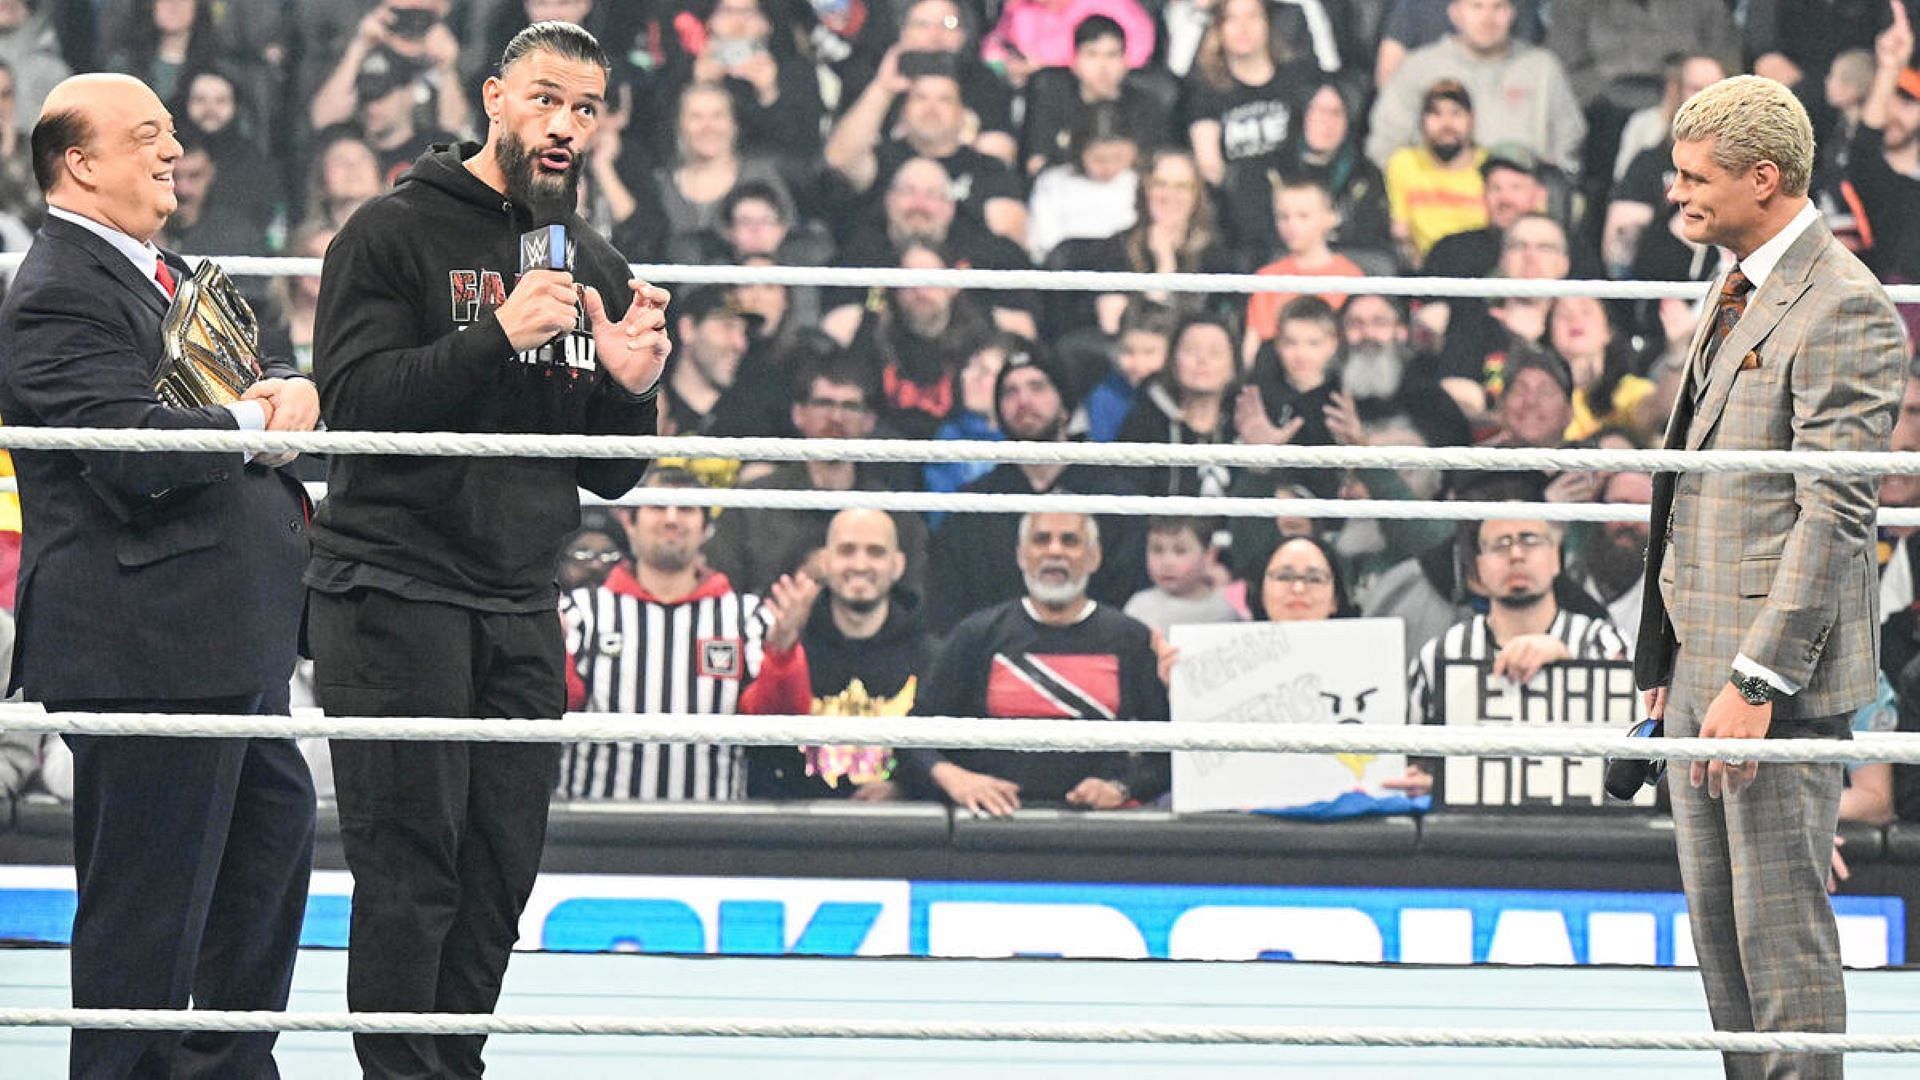 Reigns and Rhodes have two different ways of operating in WWE